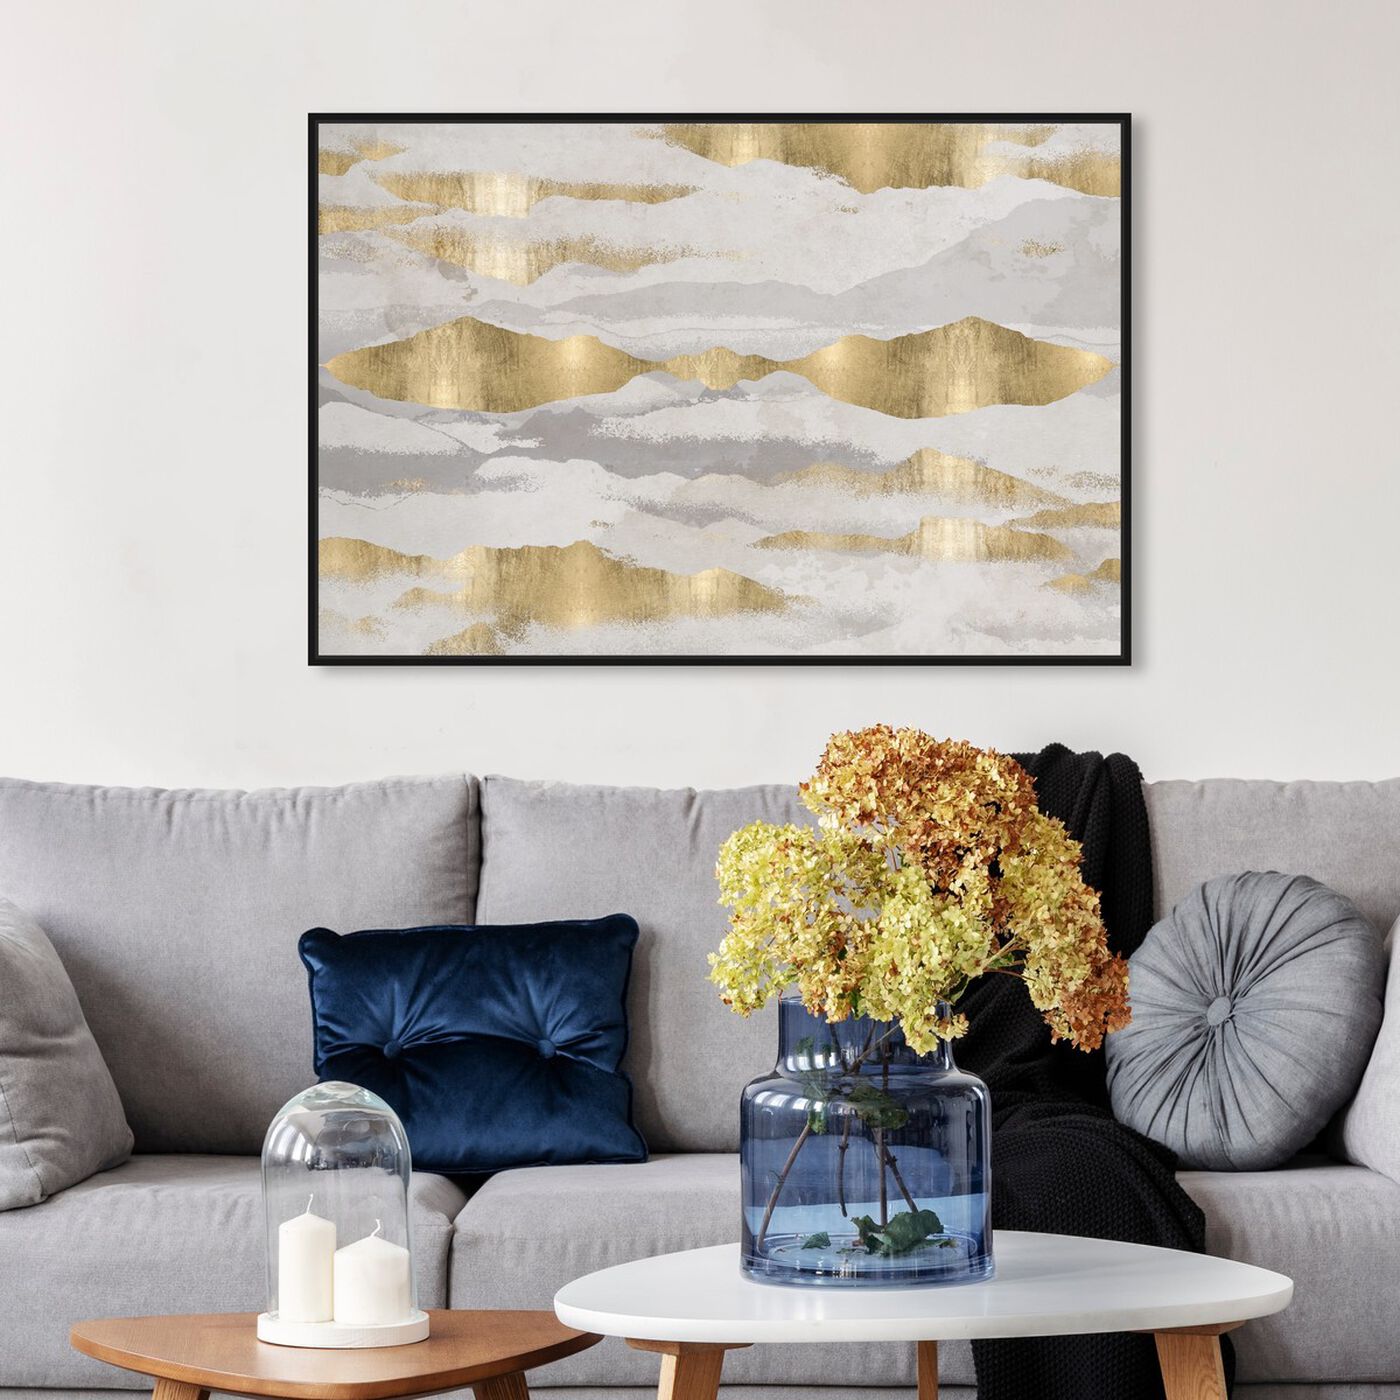 Hanging view of Mountains Of Life featuring abstract and textures art.